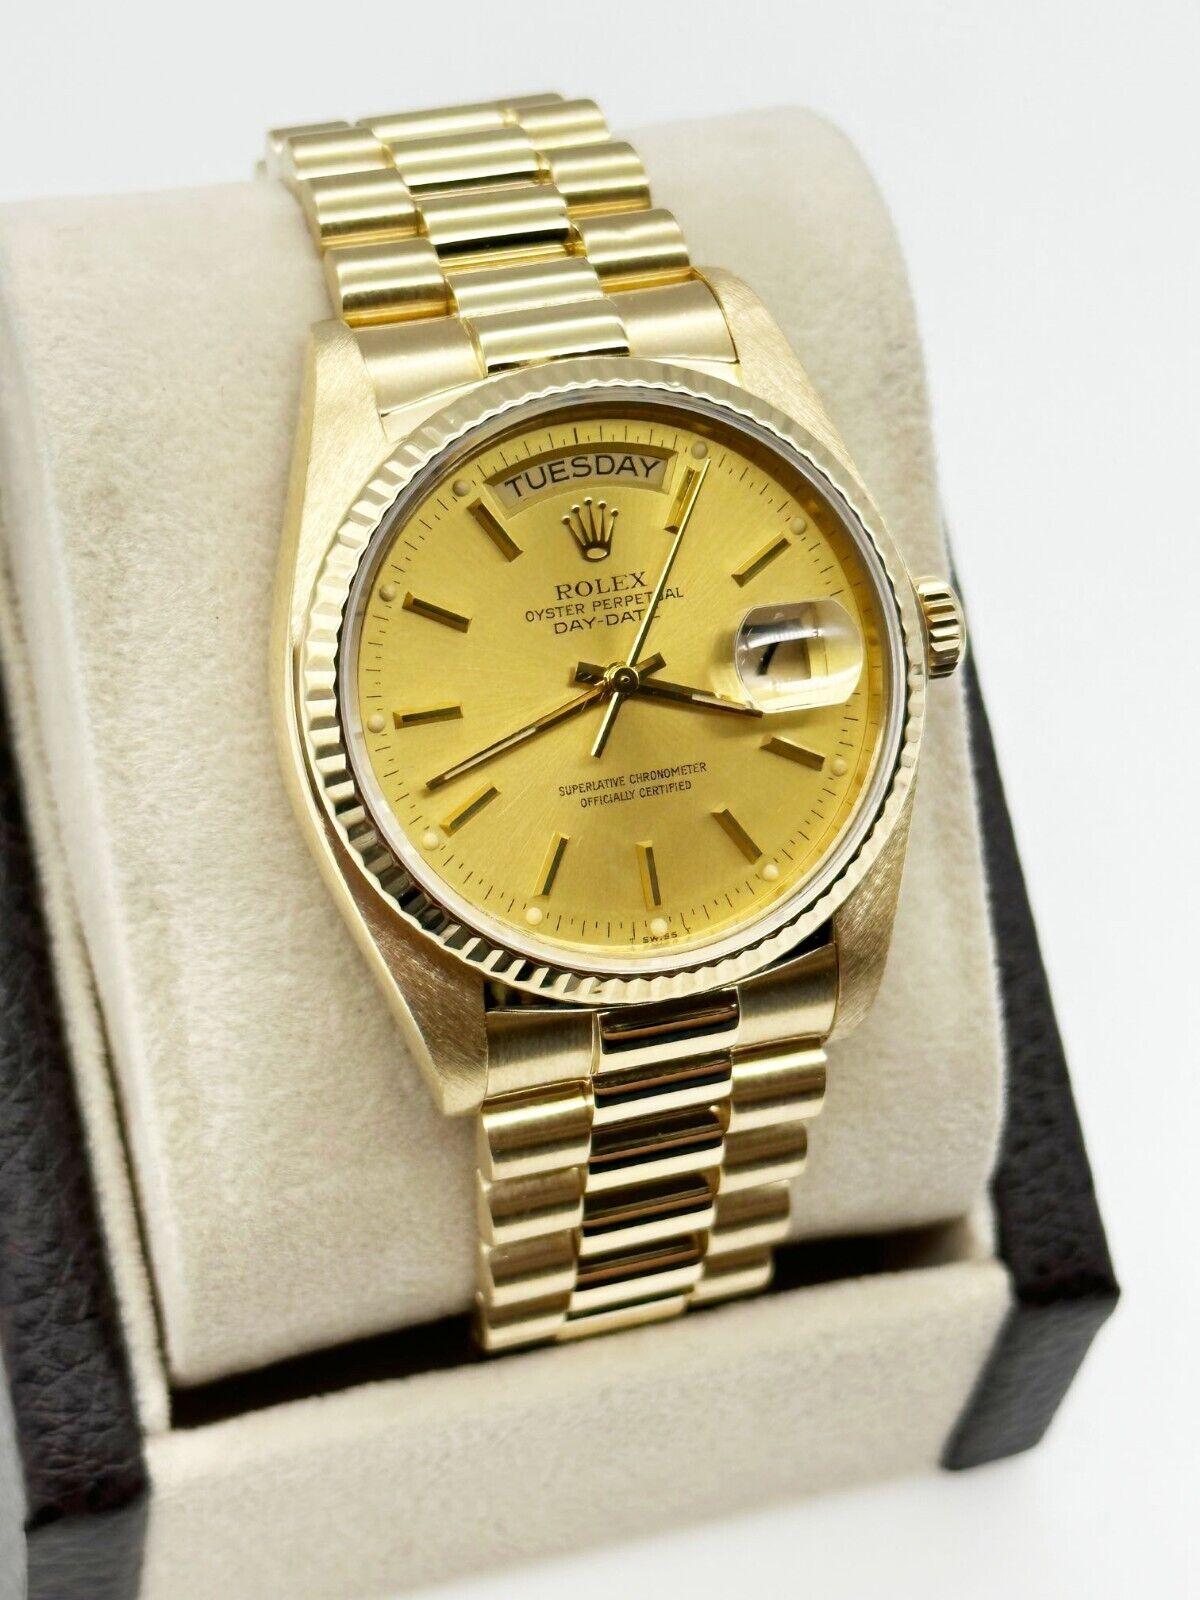 Style Number: 18038

Serial: 7347***

Year: 1982

Model: President Day Date

Case Material: 18K Yellow Gold 

Band: 18K Yellow Gold 

Bezel: 18K Yellow Gold 

Dial: Champagne

Face: Sapphire Crystal 

Case Size: 36mm 

Includes: 

-Elegant Watch